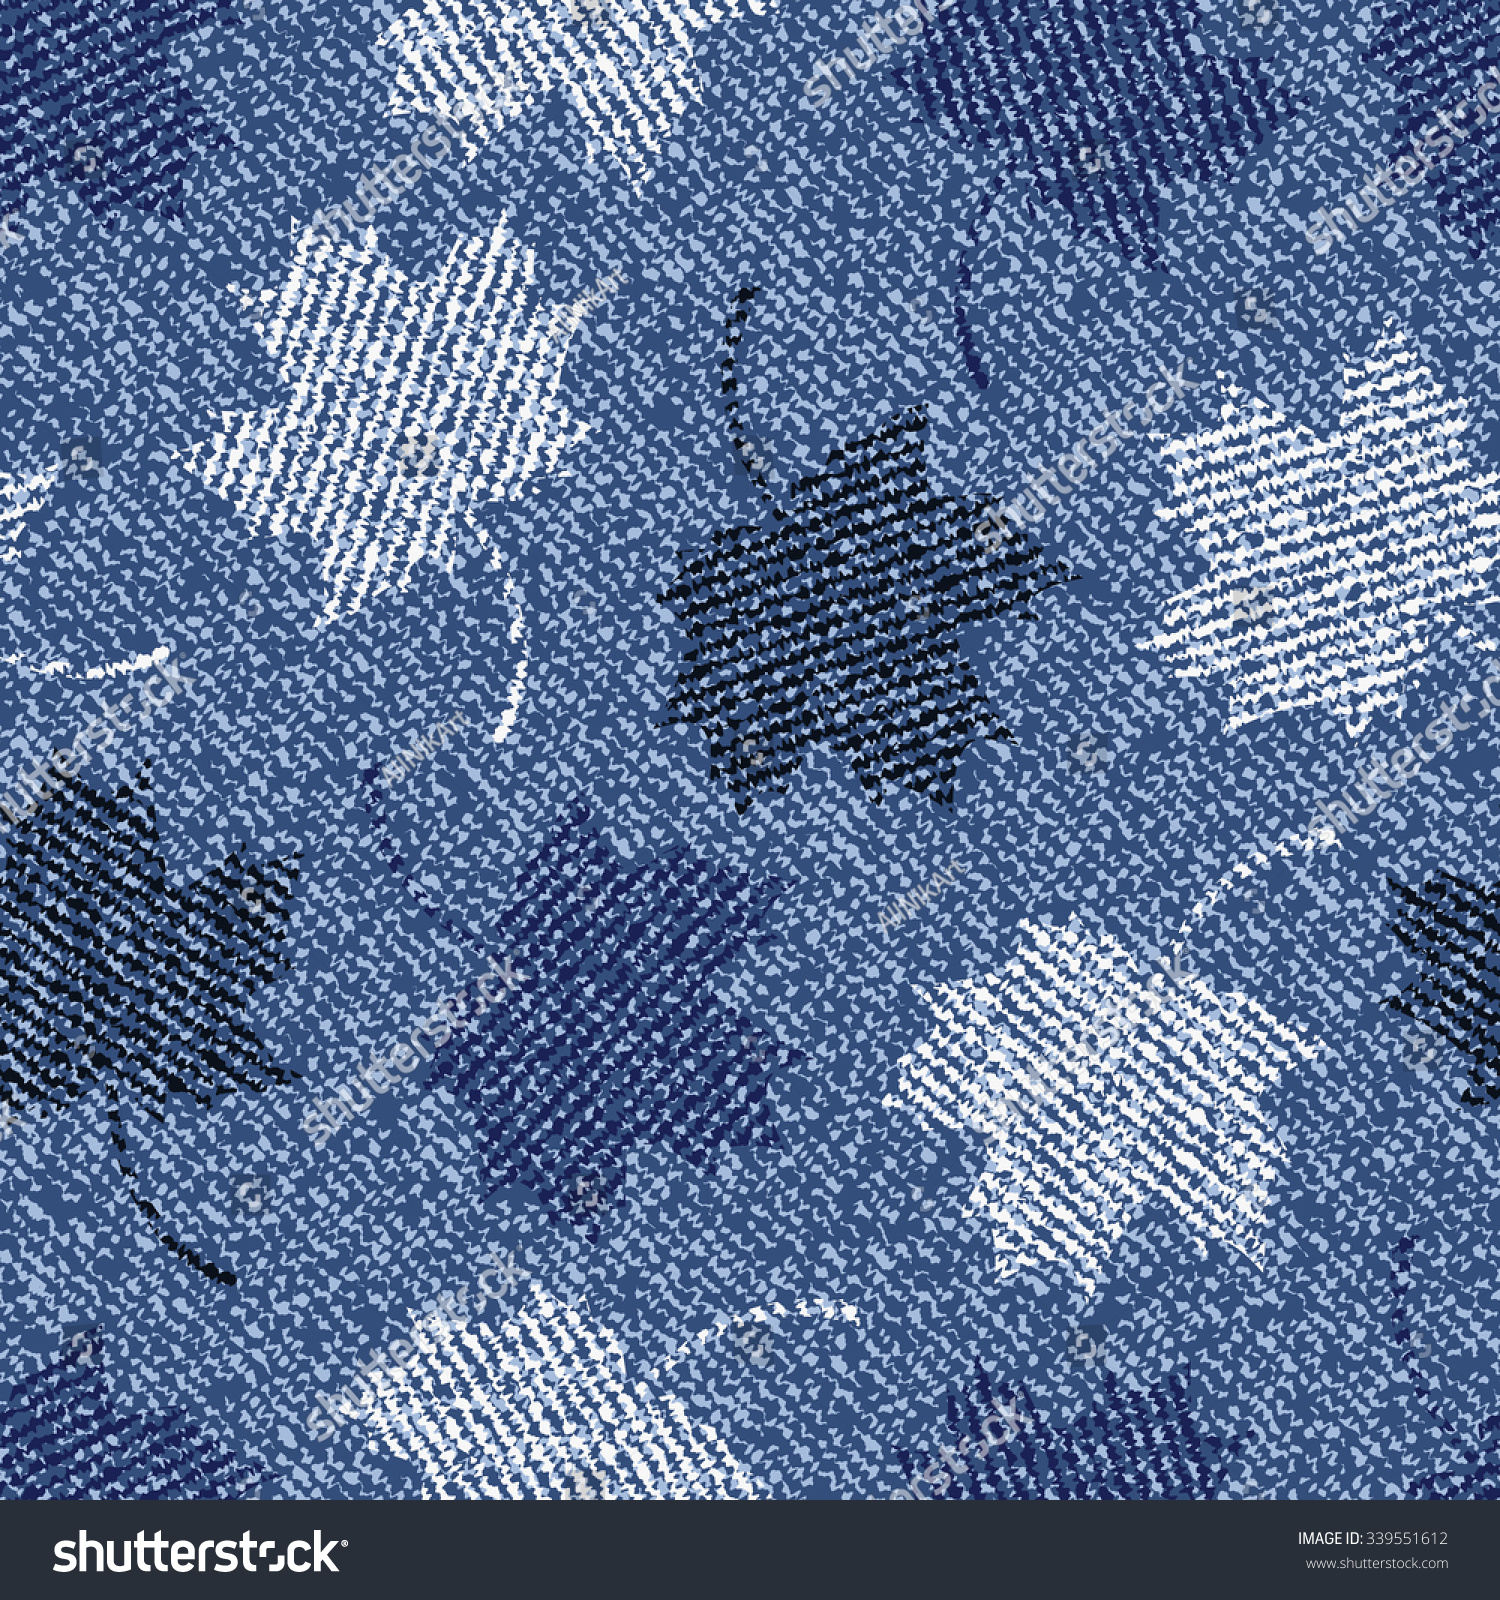 Jeans Background Maple Leaves Camouflage Vector Stock Vector 339551612 ...